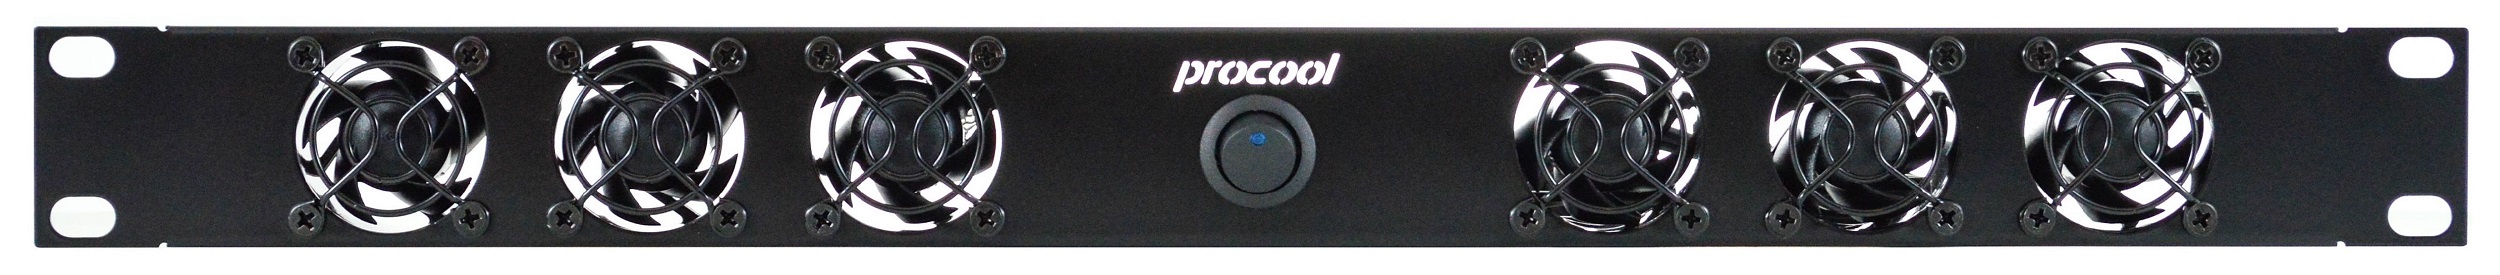 PROCOOL AV Cooling Solutions - More Air with Less